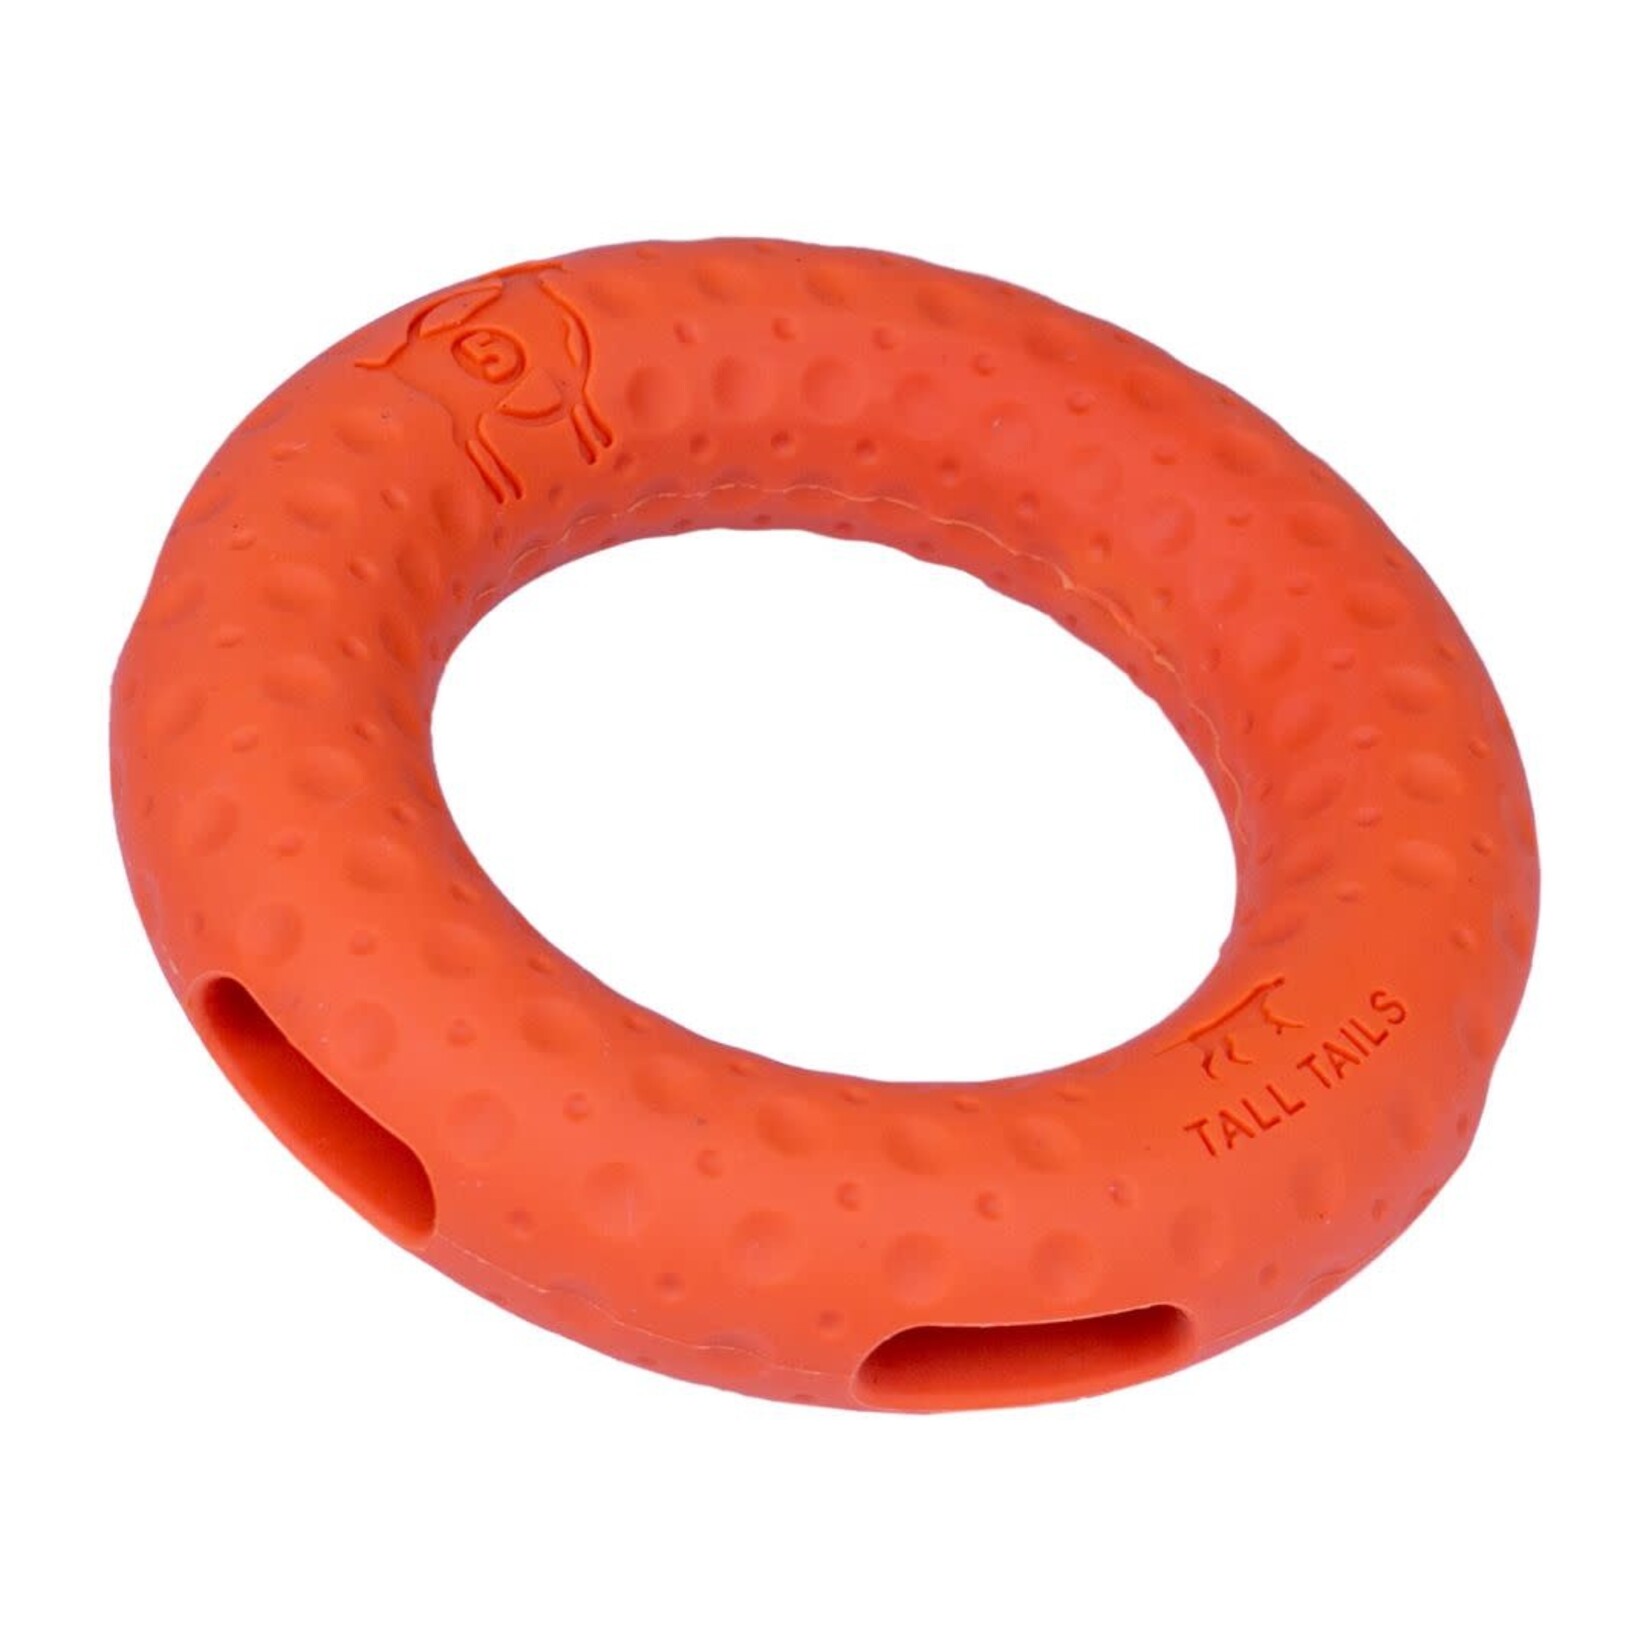 Tall Tails Tall Tails Natural Rubber GOAT Sport Ring